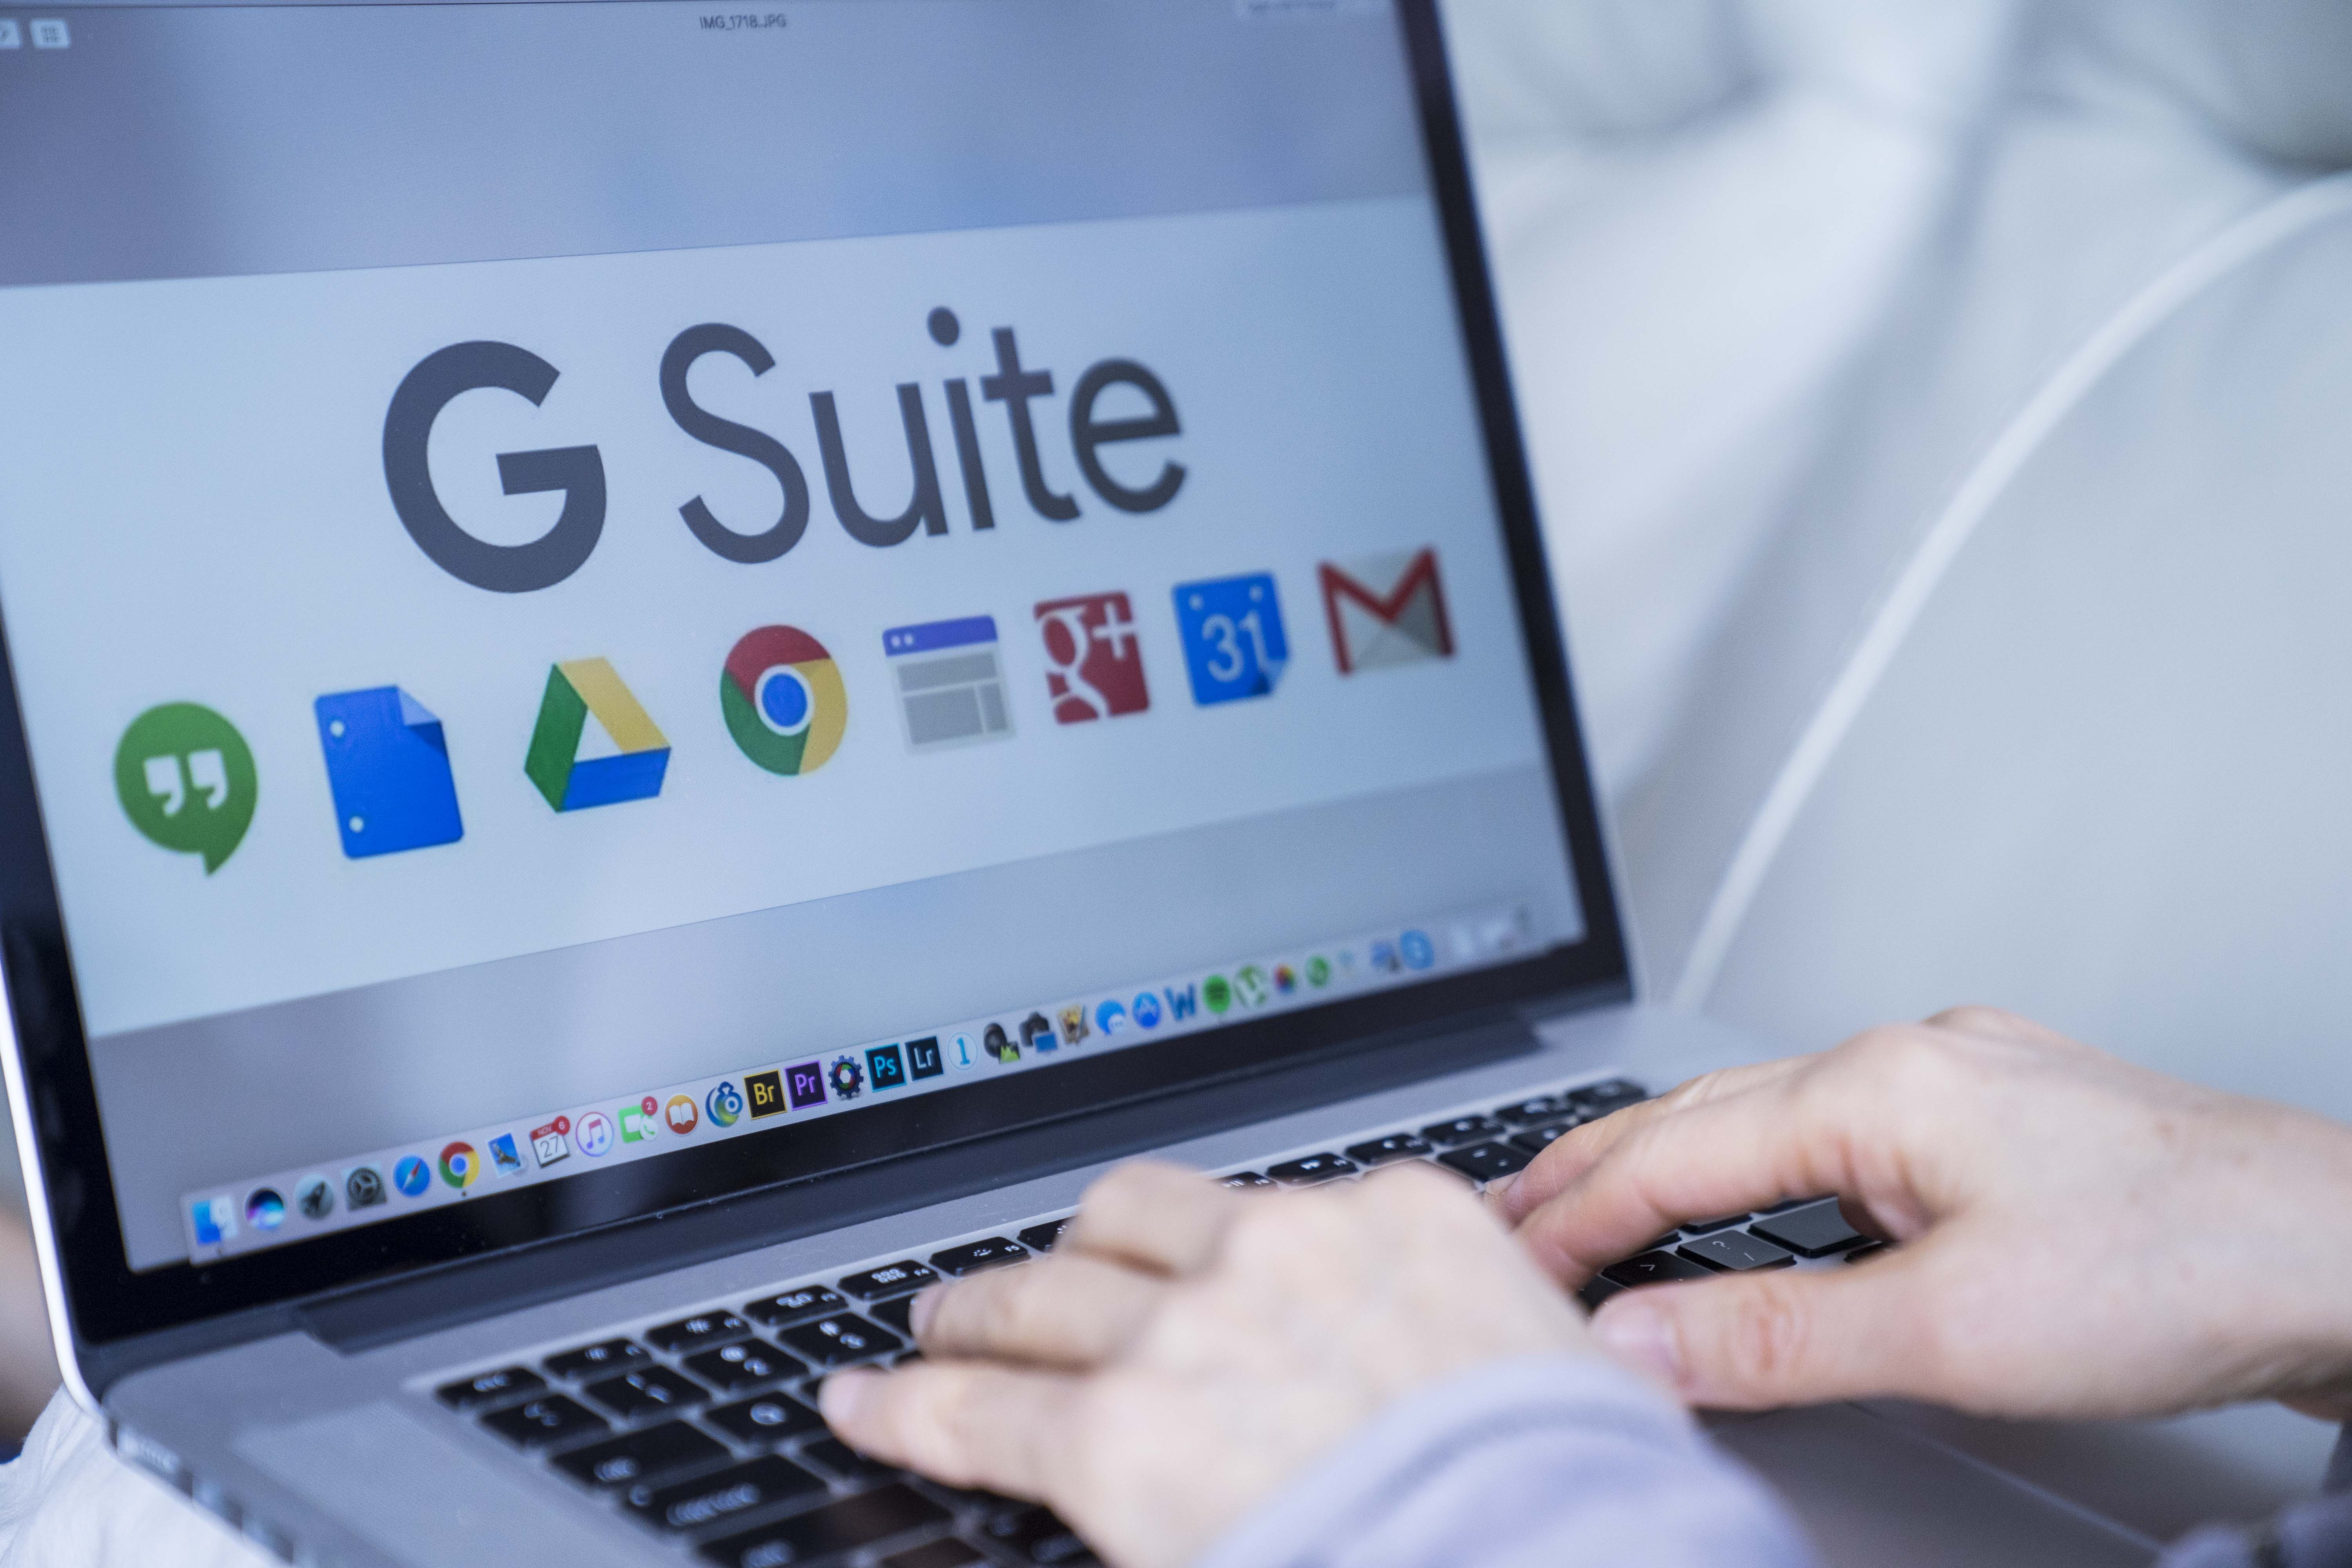 Google will let legacy G Suite users migrate to free Google accounts